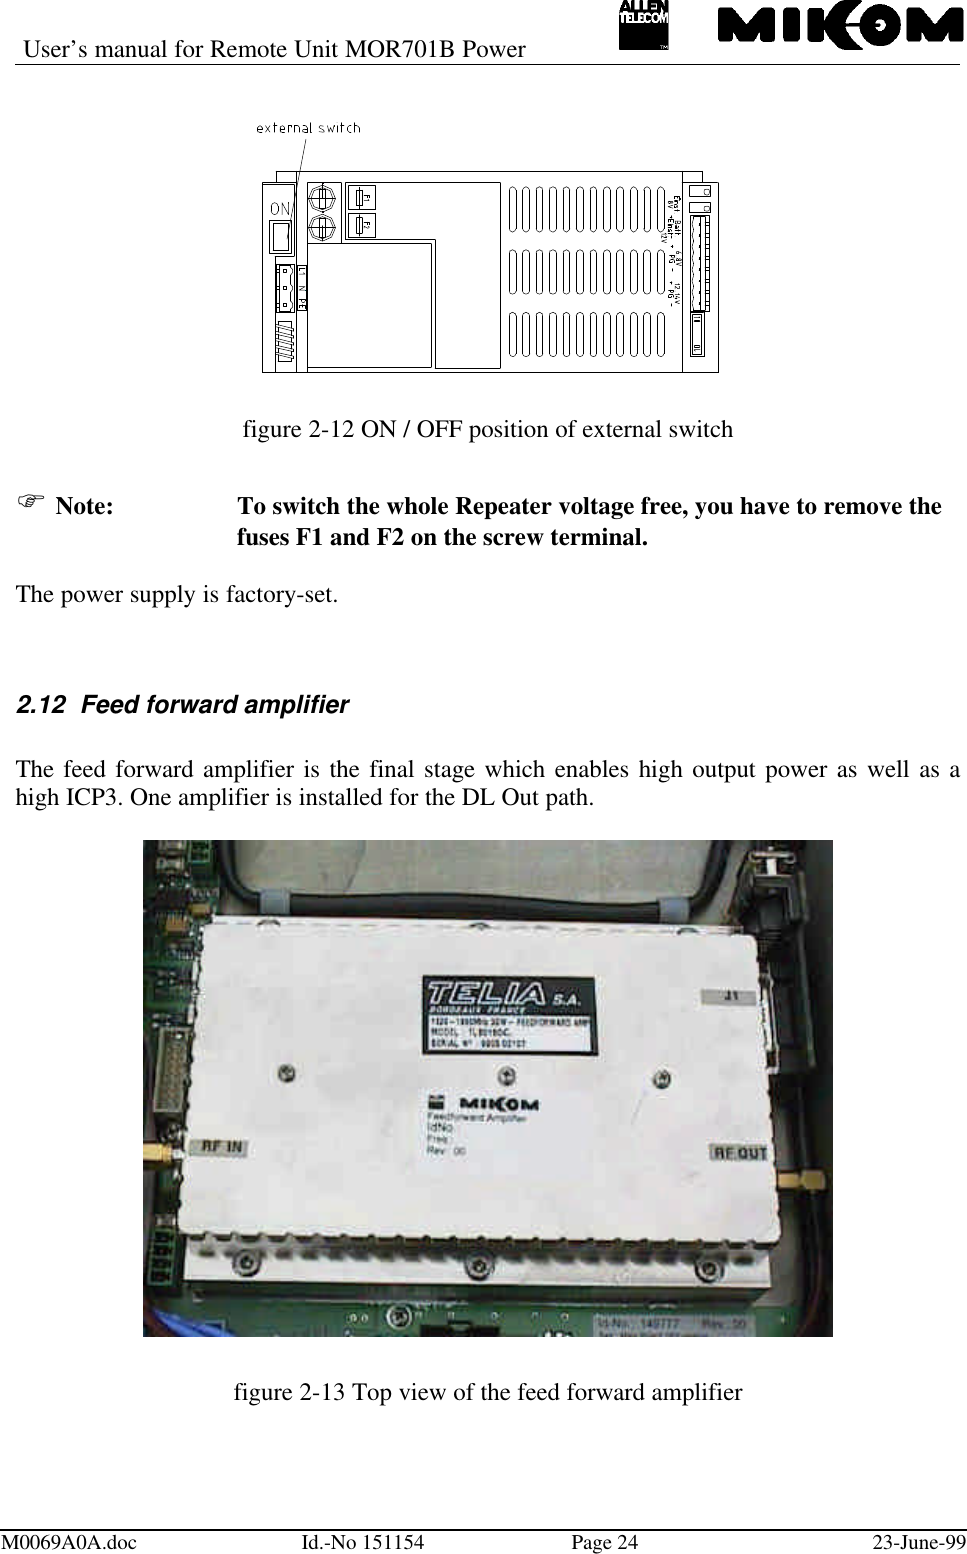 User’s manual for Remote Unit MOR701B PowerM0069A0A.doc Id.-No 151154 Page 24 23-June-99figure 2-12 ON / OFF position of external switchF Note: To switch the whole Repeater voltage free, you have to remove thefuses F1 and F2 on the screw terminal.The power supply is factory-set.2.12 Feed forward amplifierThe feed forward amplifier is the final stage which enables high output power as well as ahigh ICP3. One amplifier is installed for the DL Out path.figure 2-13 Top view of the feed forward amplifier